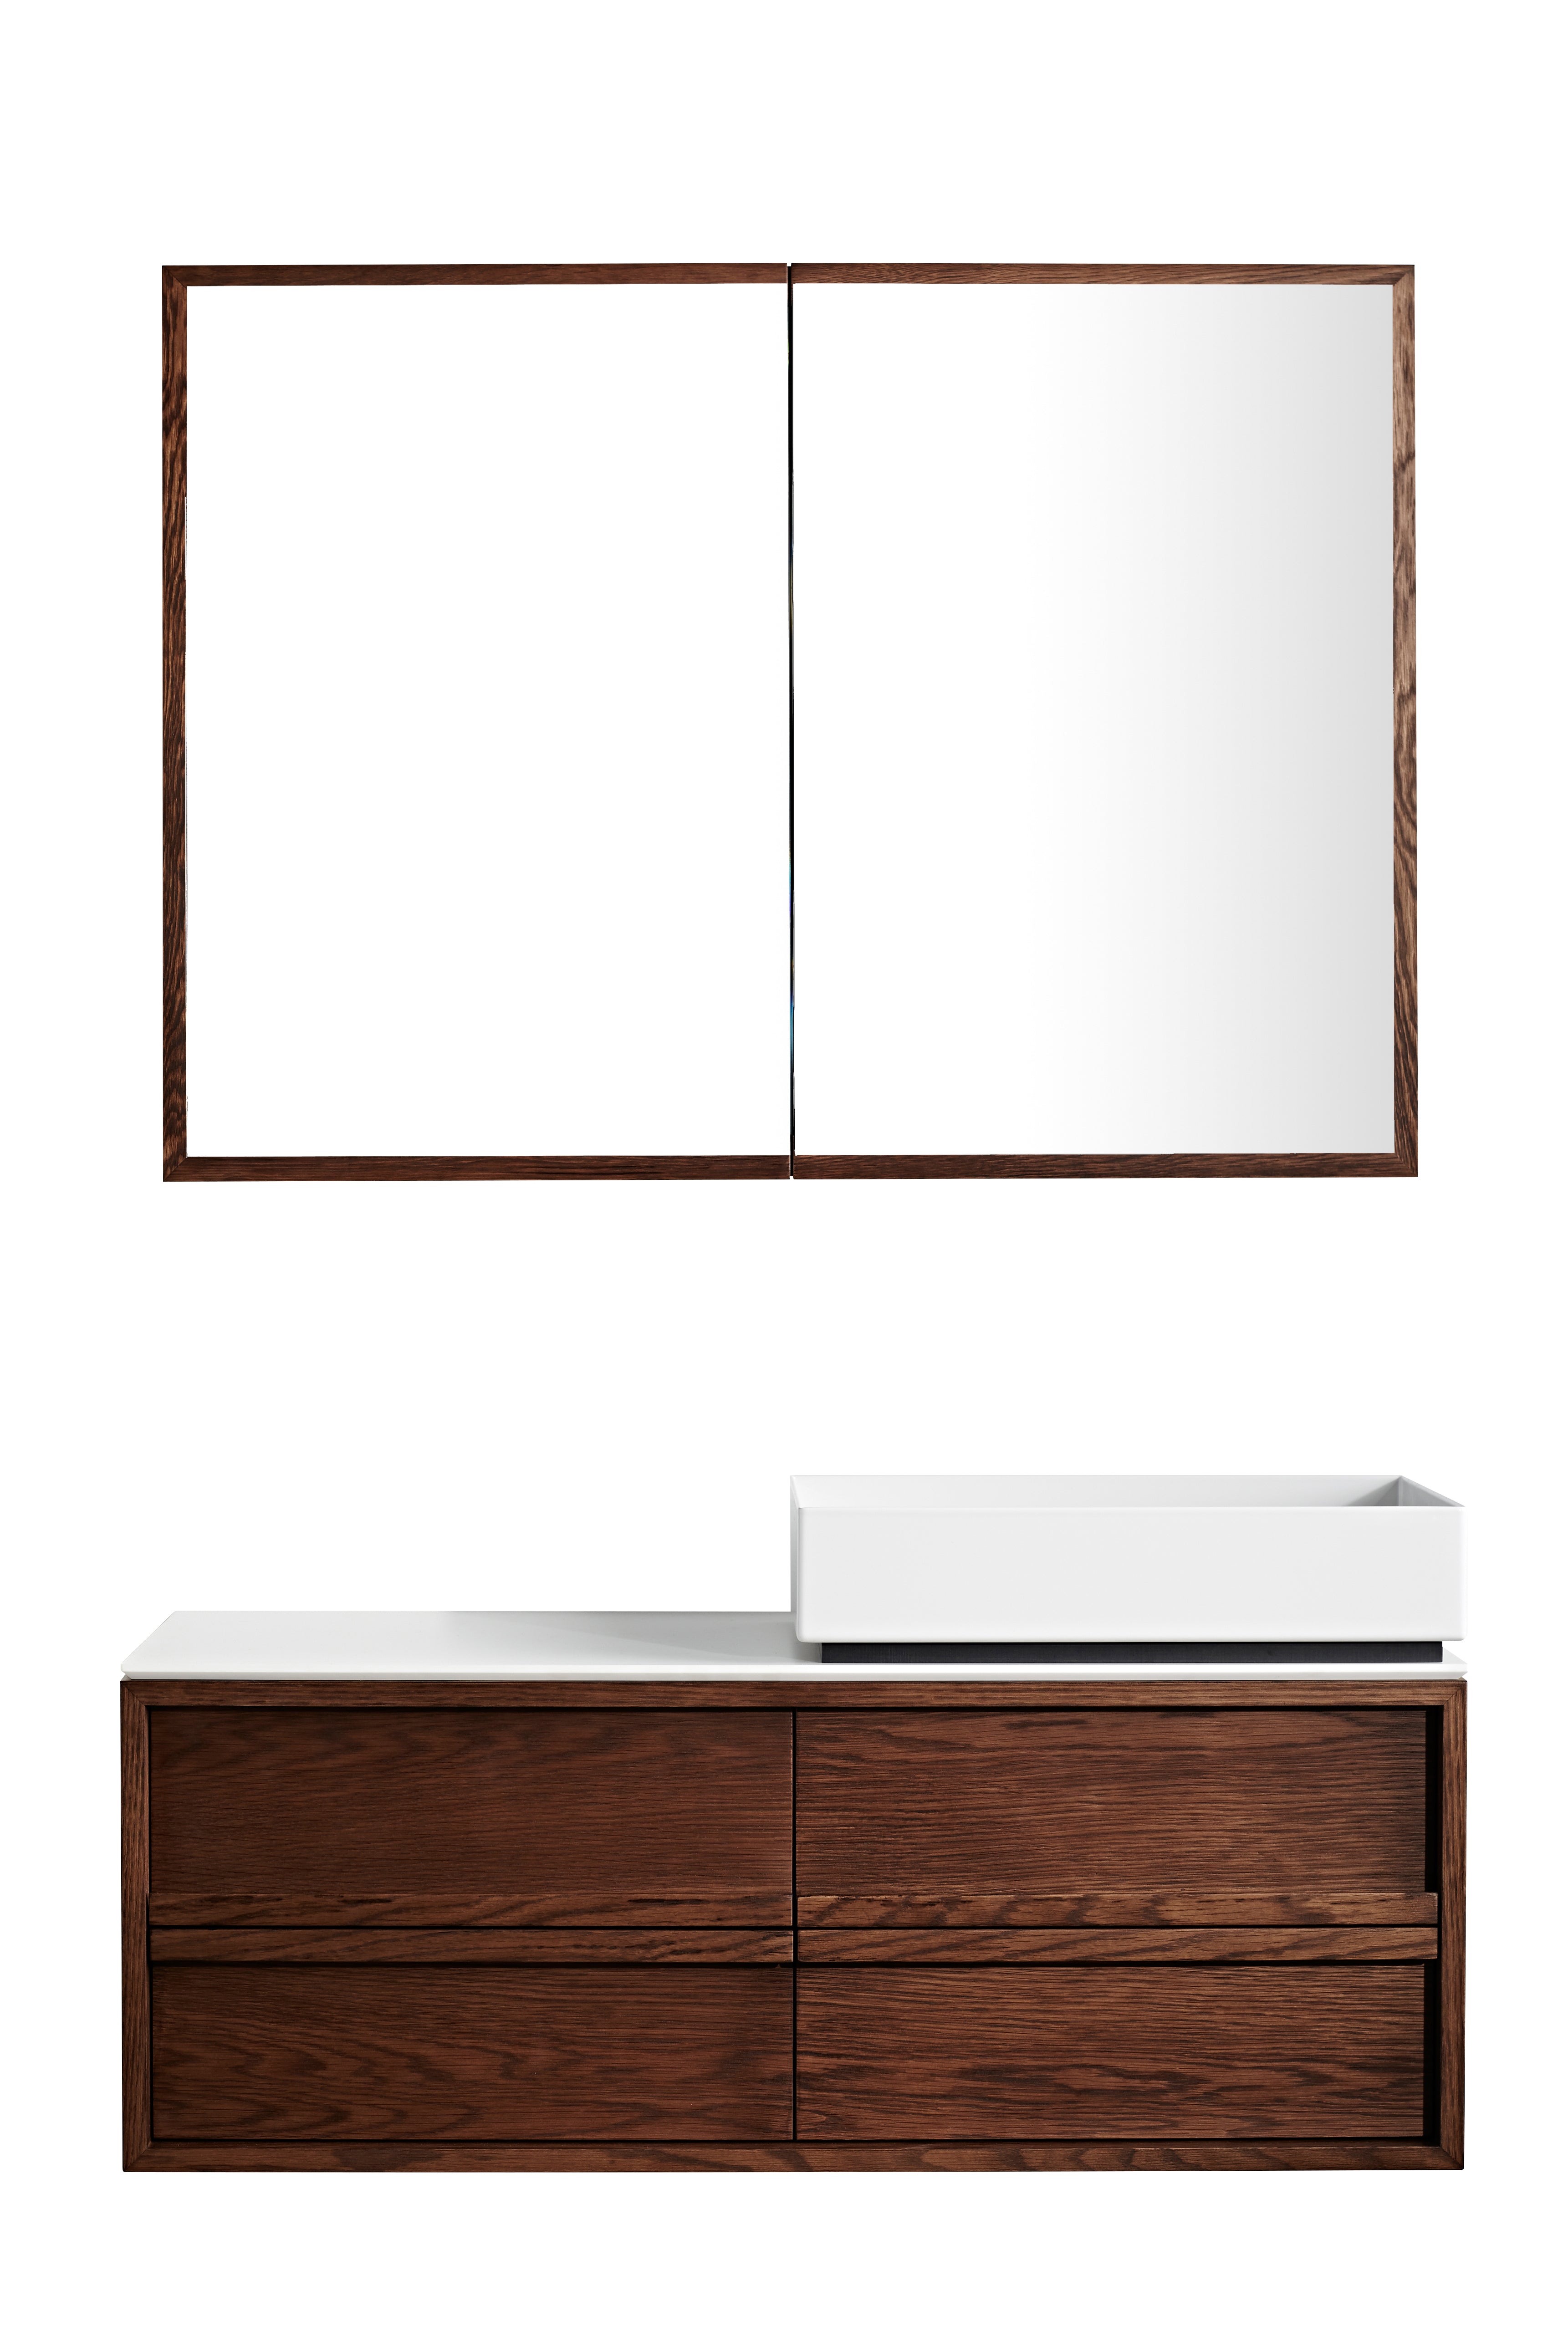 ISSY Z8 Butterfly Shaving Cabinet 700x930 - Zuster Furniture